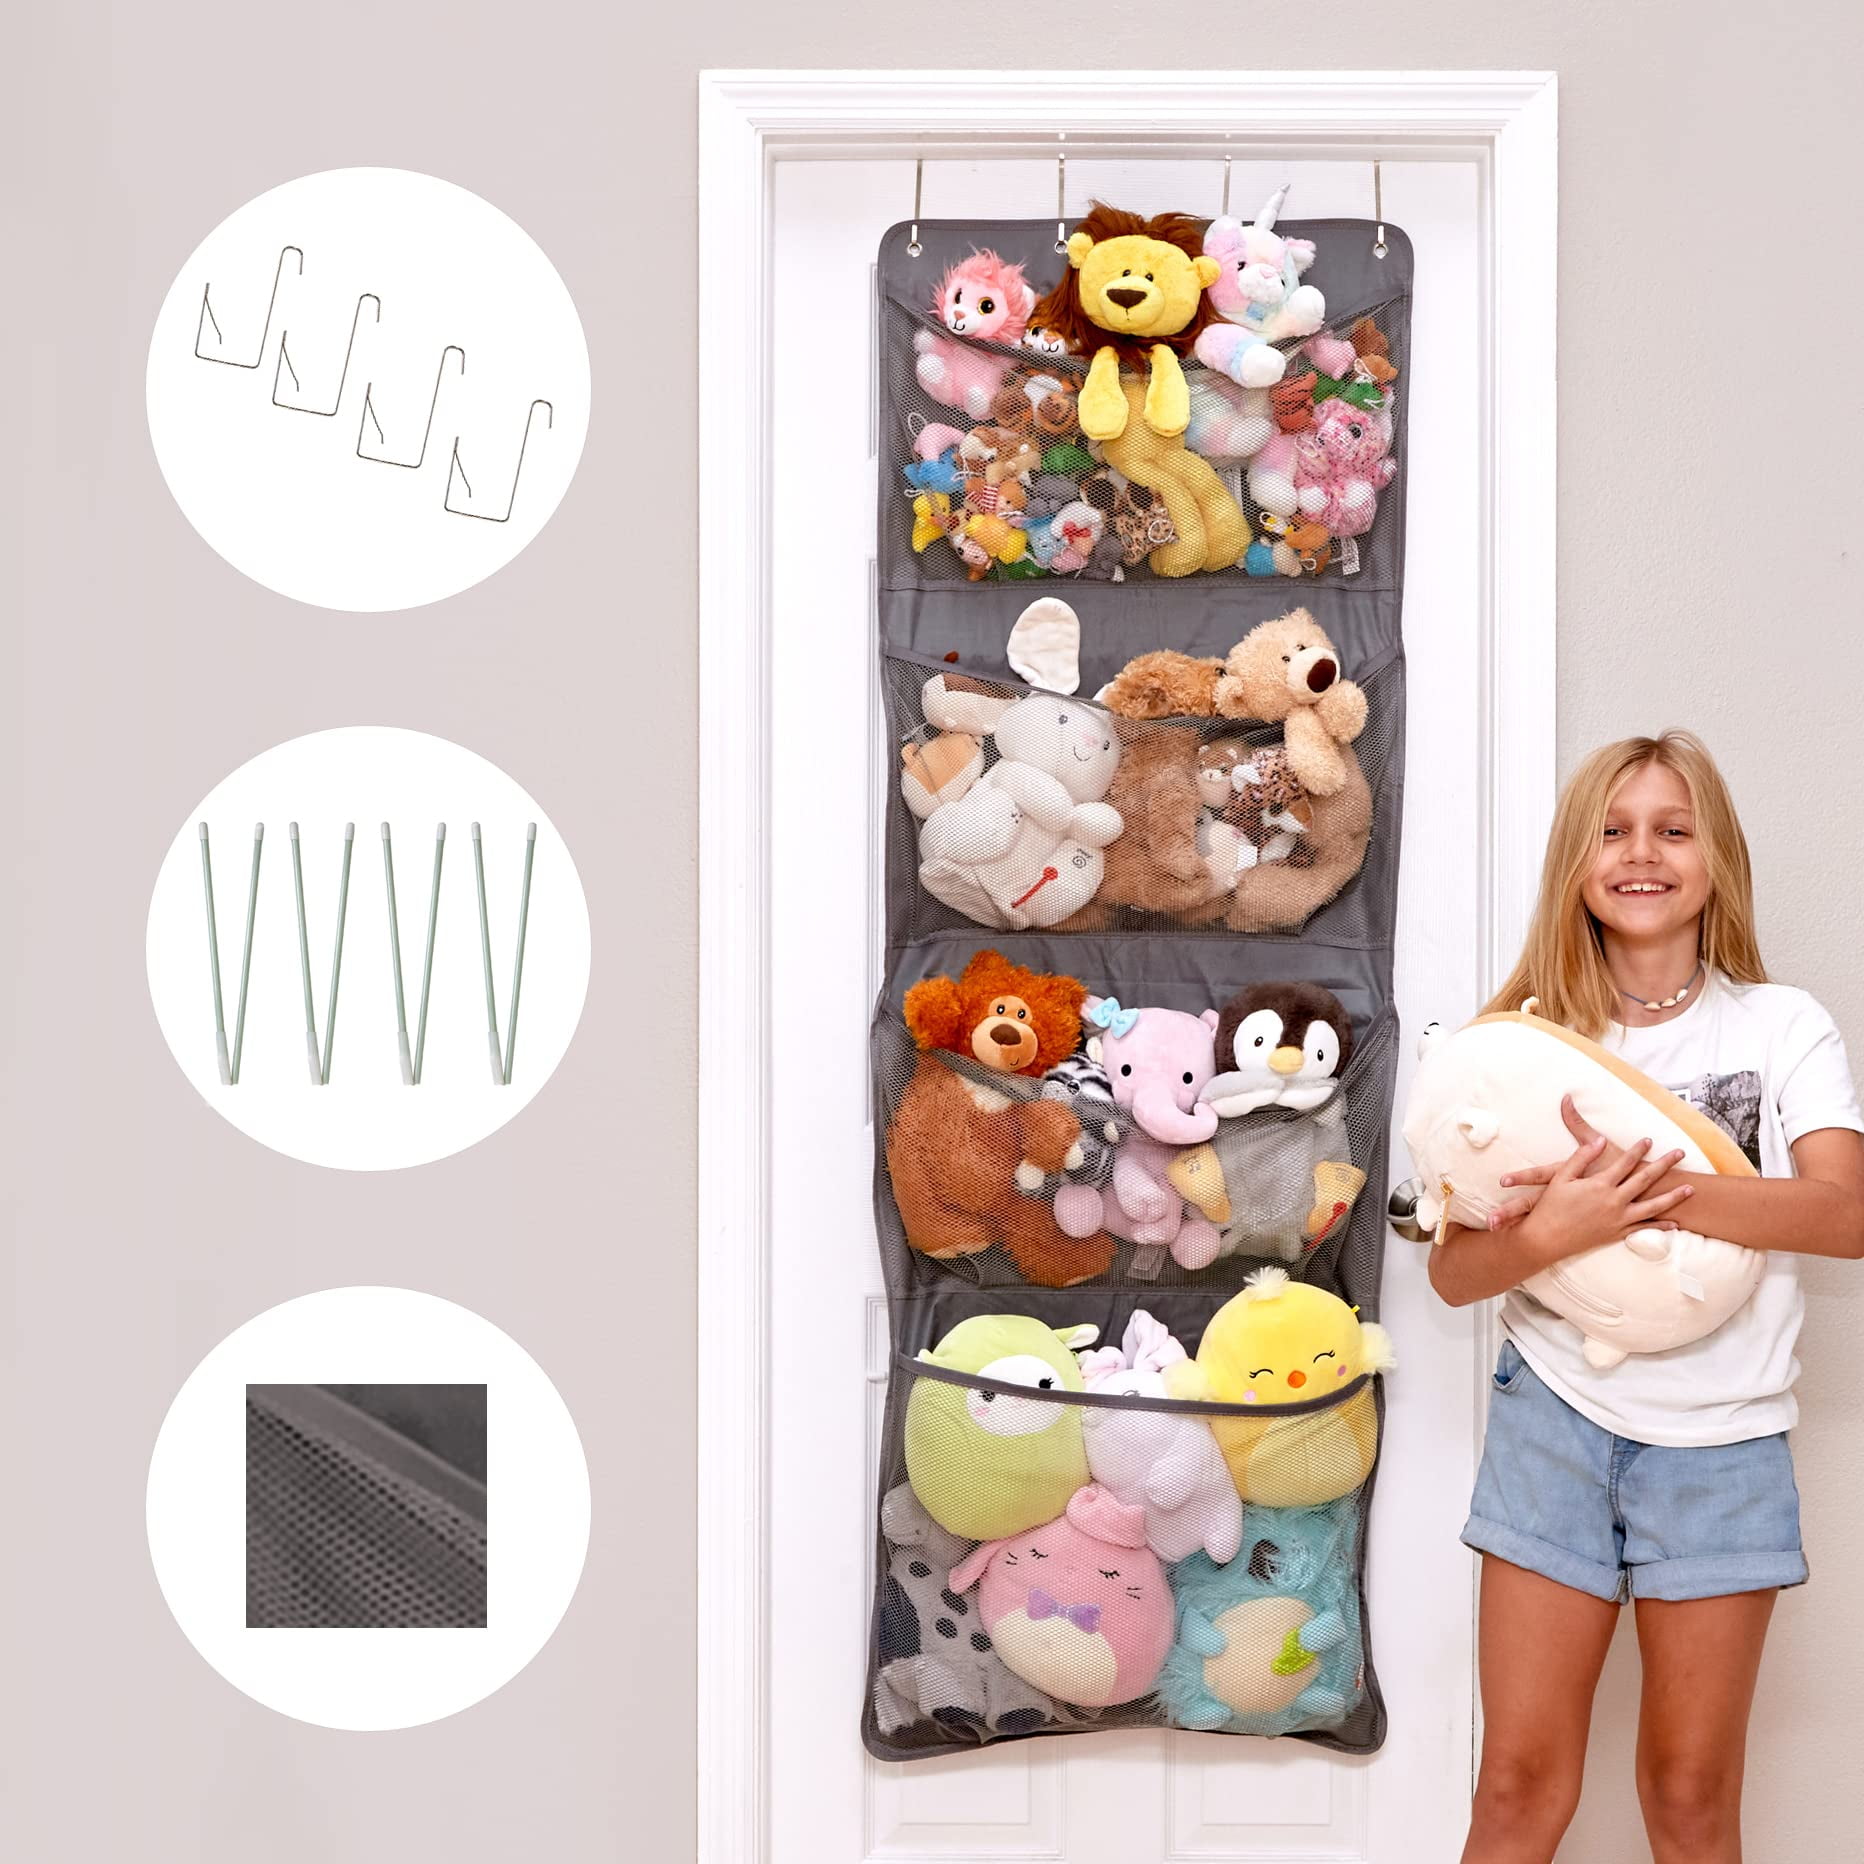 Stuffed Animal Organizer with 7 Mesh Pockets and Over The Door Hanging